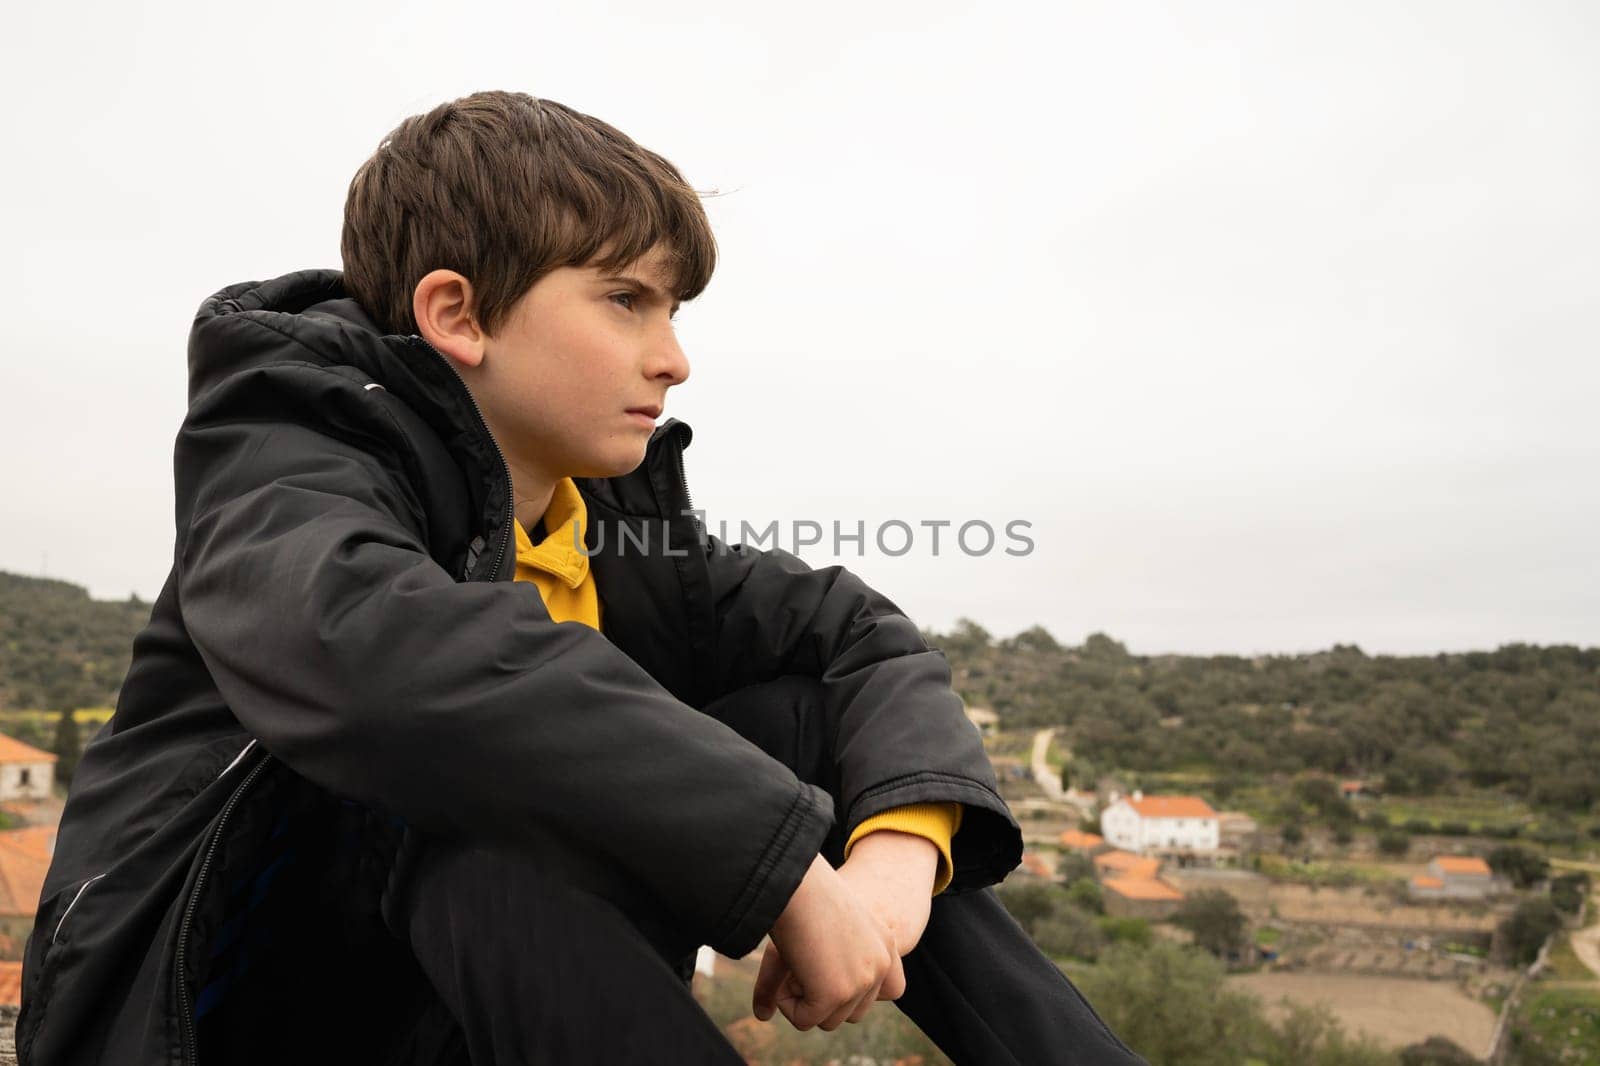 Profile of a serious young boy contemplating sitting in the mountain near a town by papatonic